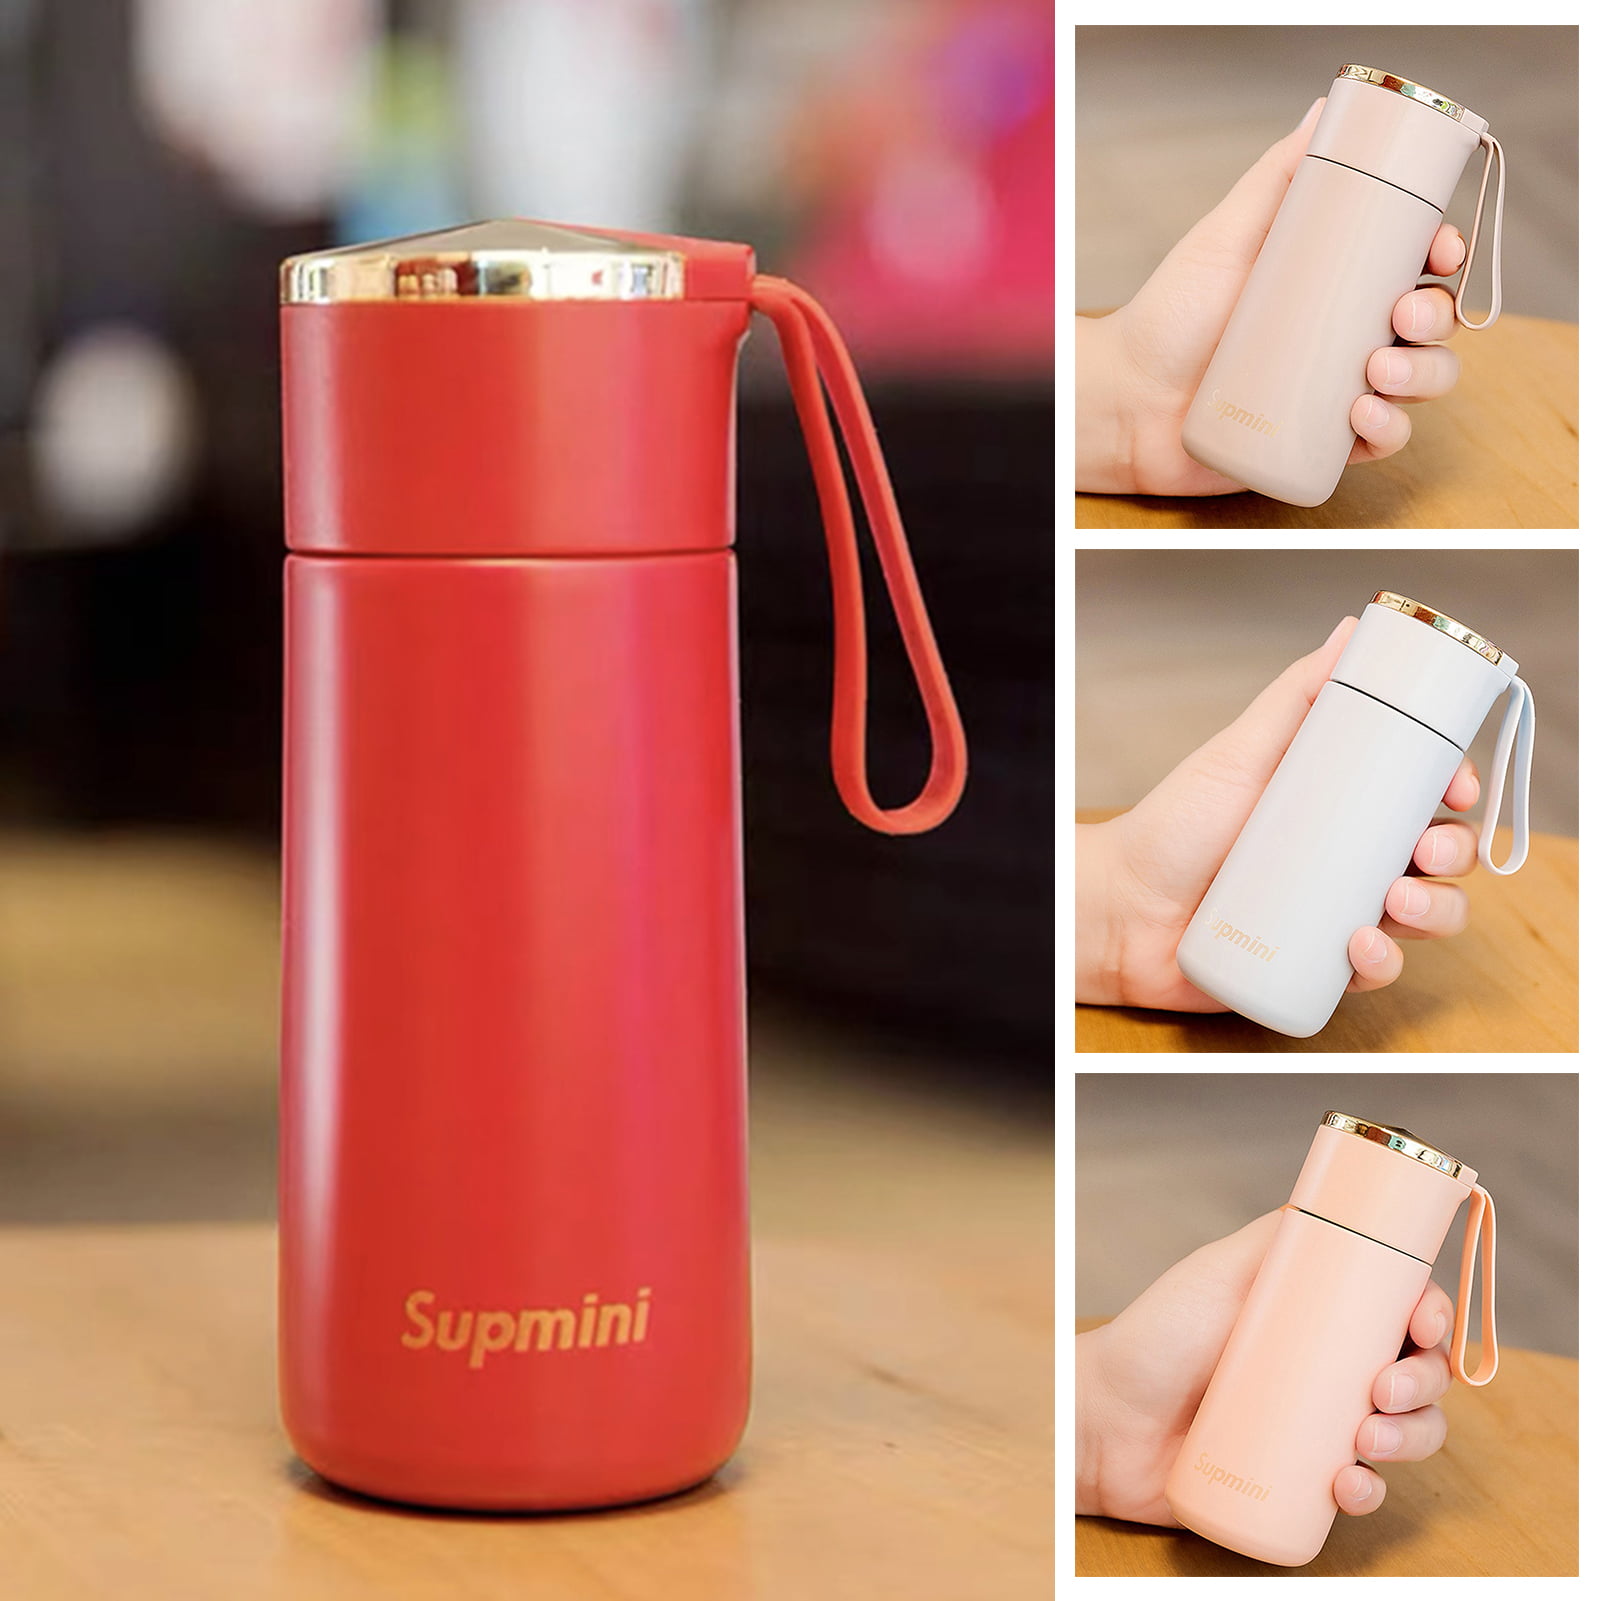 180ml-Beige Mini Stainless Steel Insulated Cup Double-Wall Vacuum Mug Travel Thermal Water Bottle Outdoor Portable Tea Coffee Container